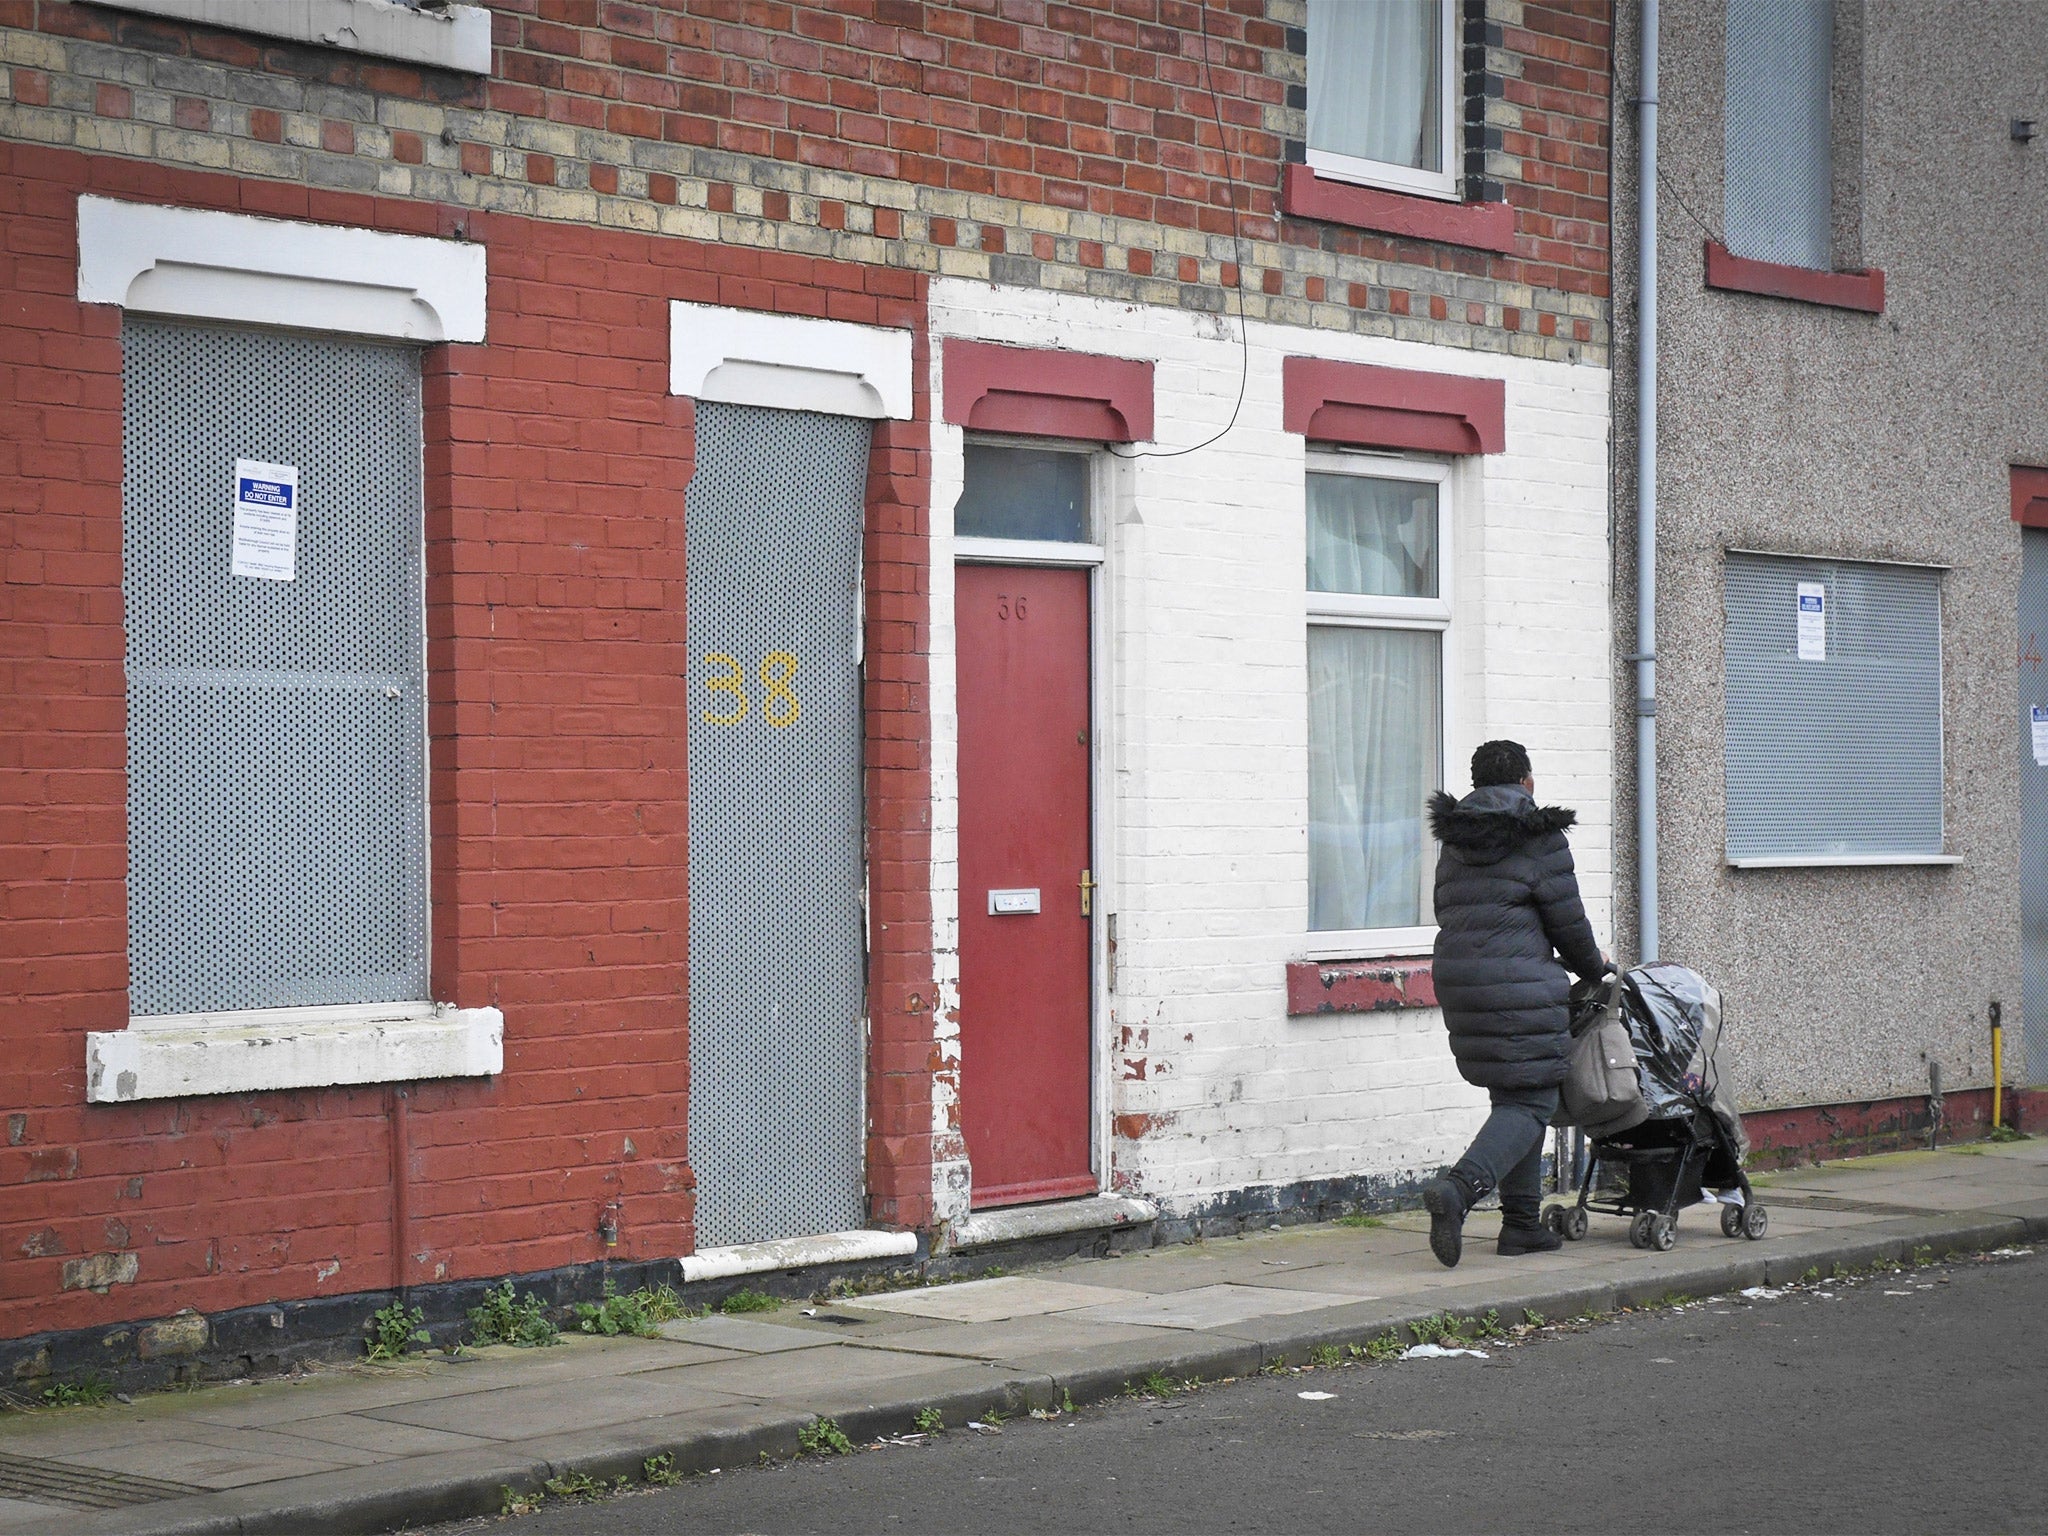 The teenager was among those housed in Middlesbrough, where it was revealed last month that the homes of asylum seekers could be identified by their red doors